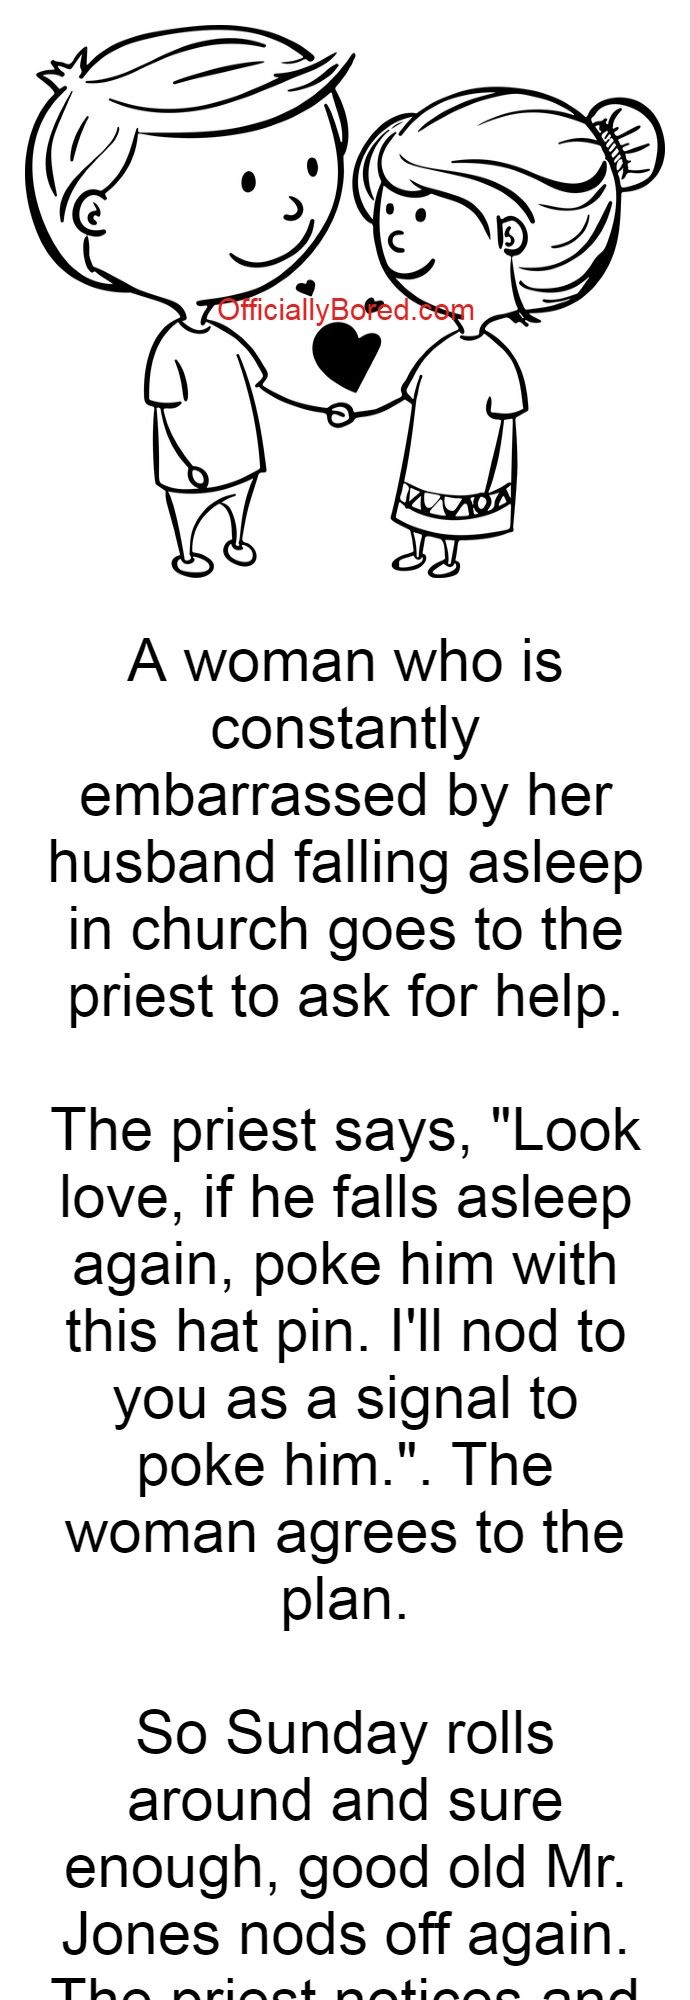 When a woman who is constantly embarrassed by her husband goes to the priest for help | OfficiallyBored